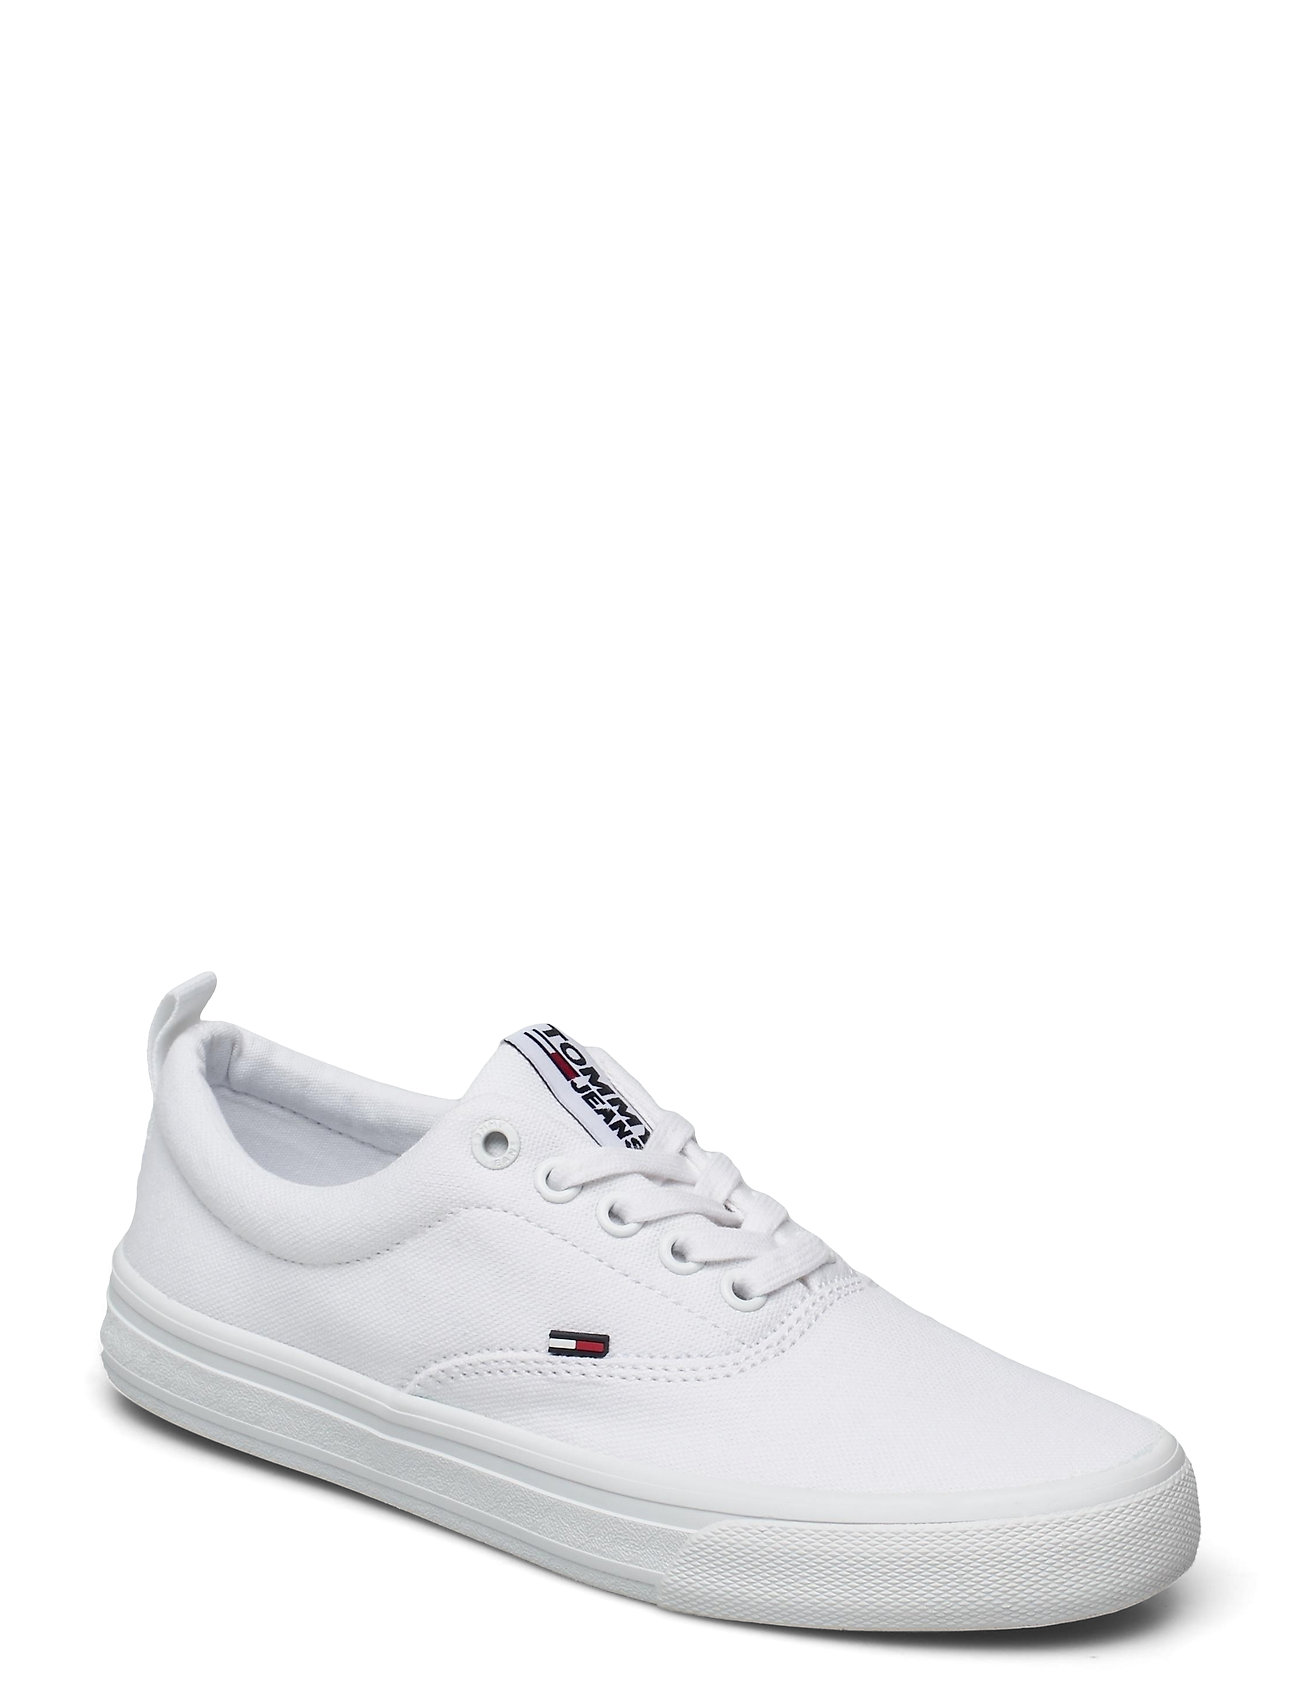 Tommy Hilfiger - WMN CLASSIC TOMMY JEANS SNEAKER - low top sneakers - white - 0